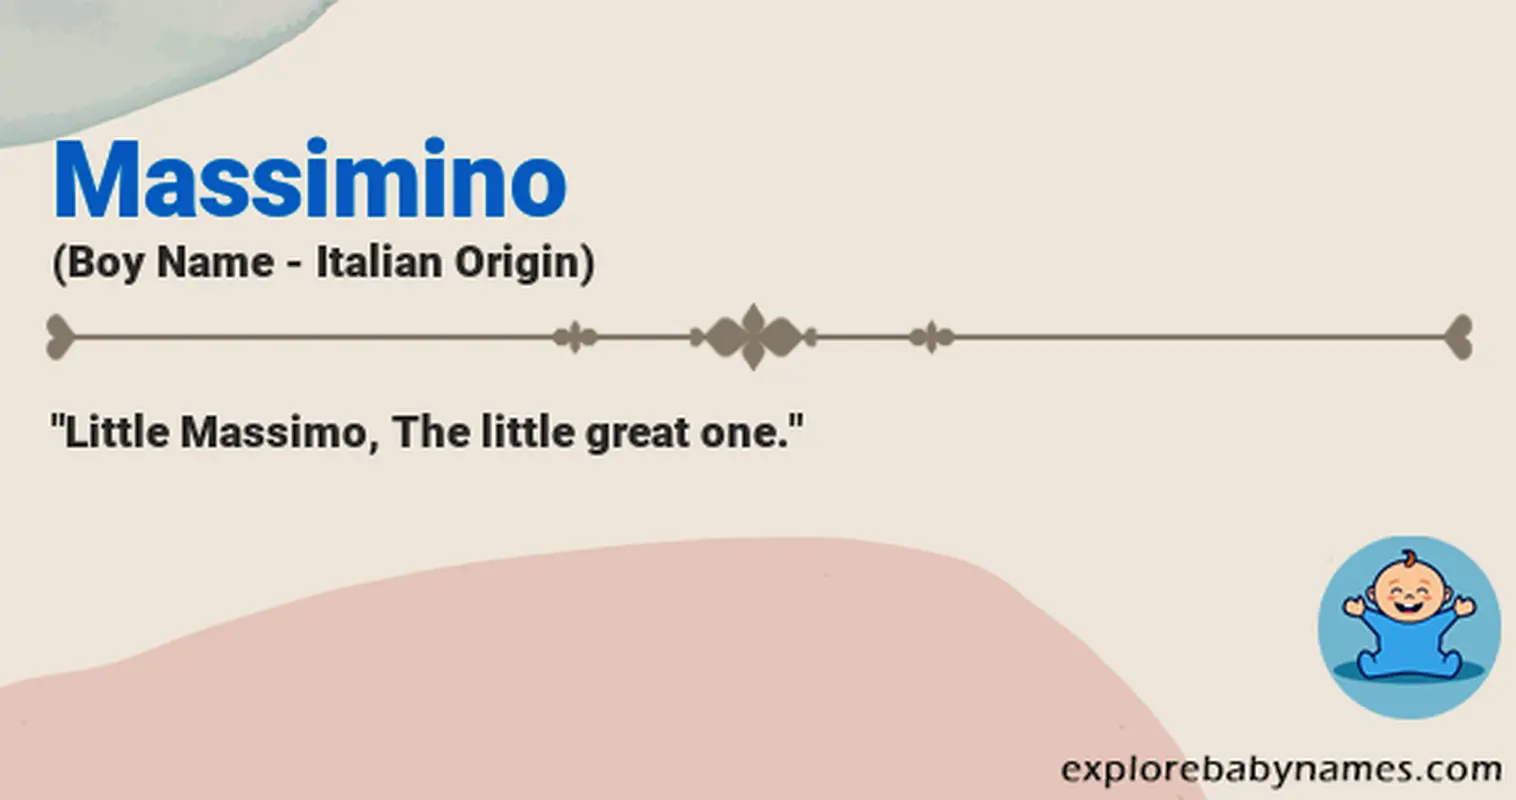 Meaning of Massimino